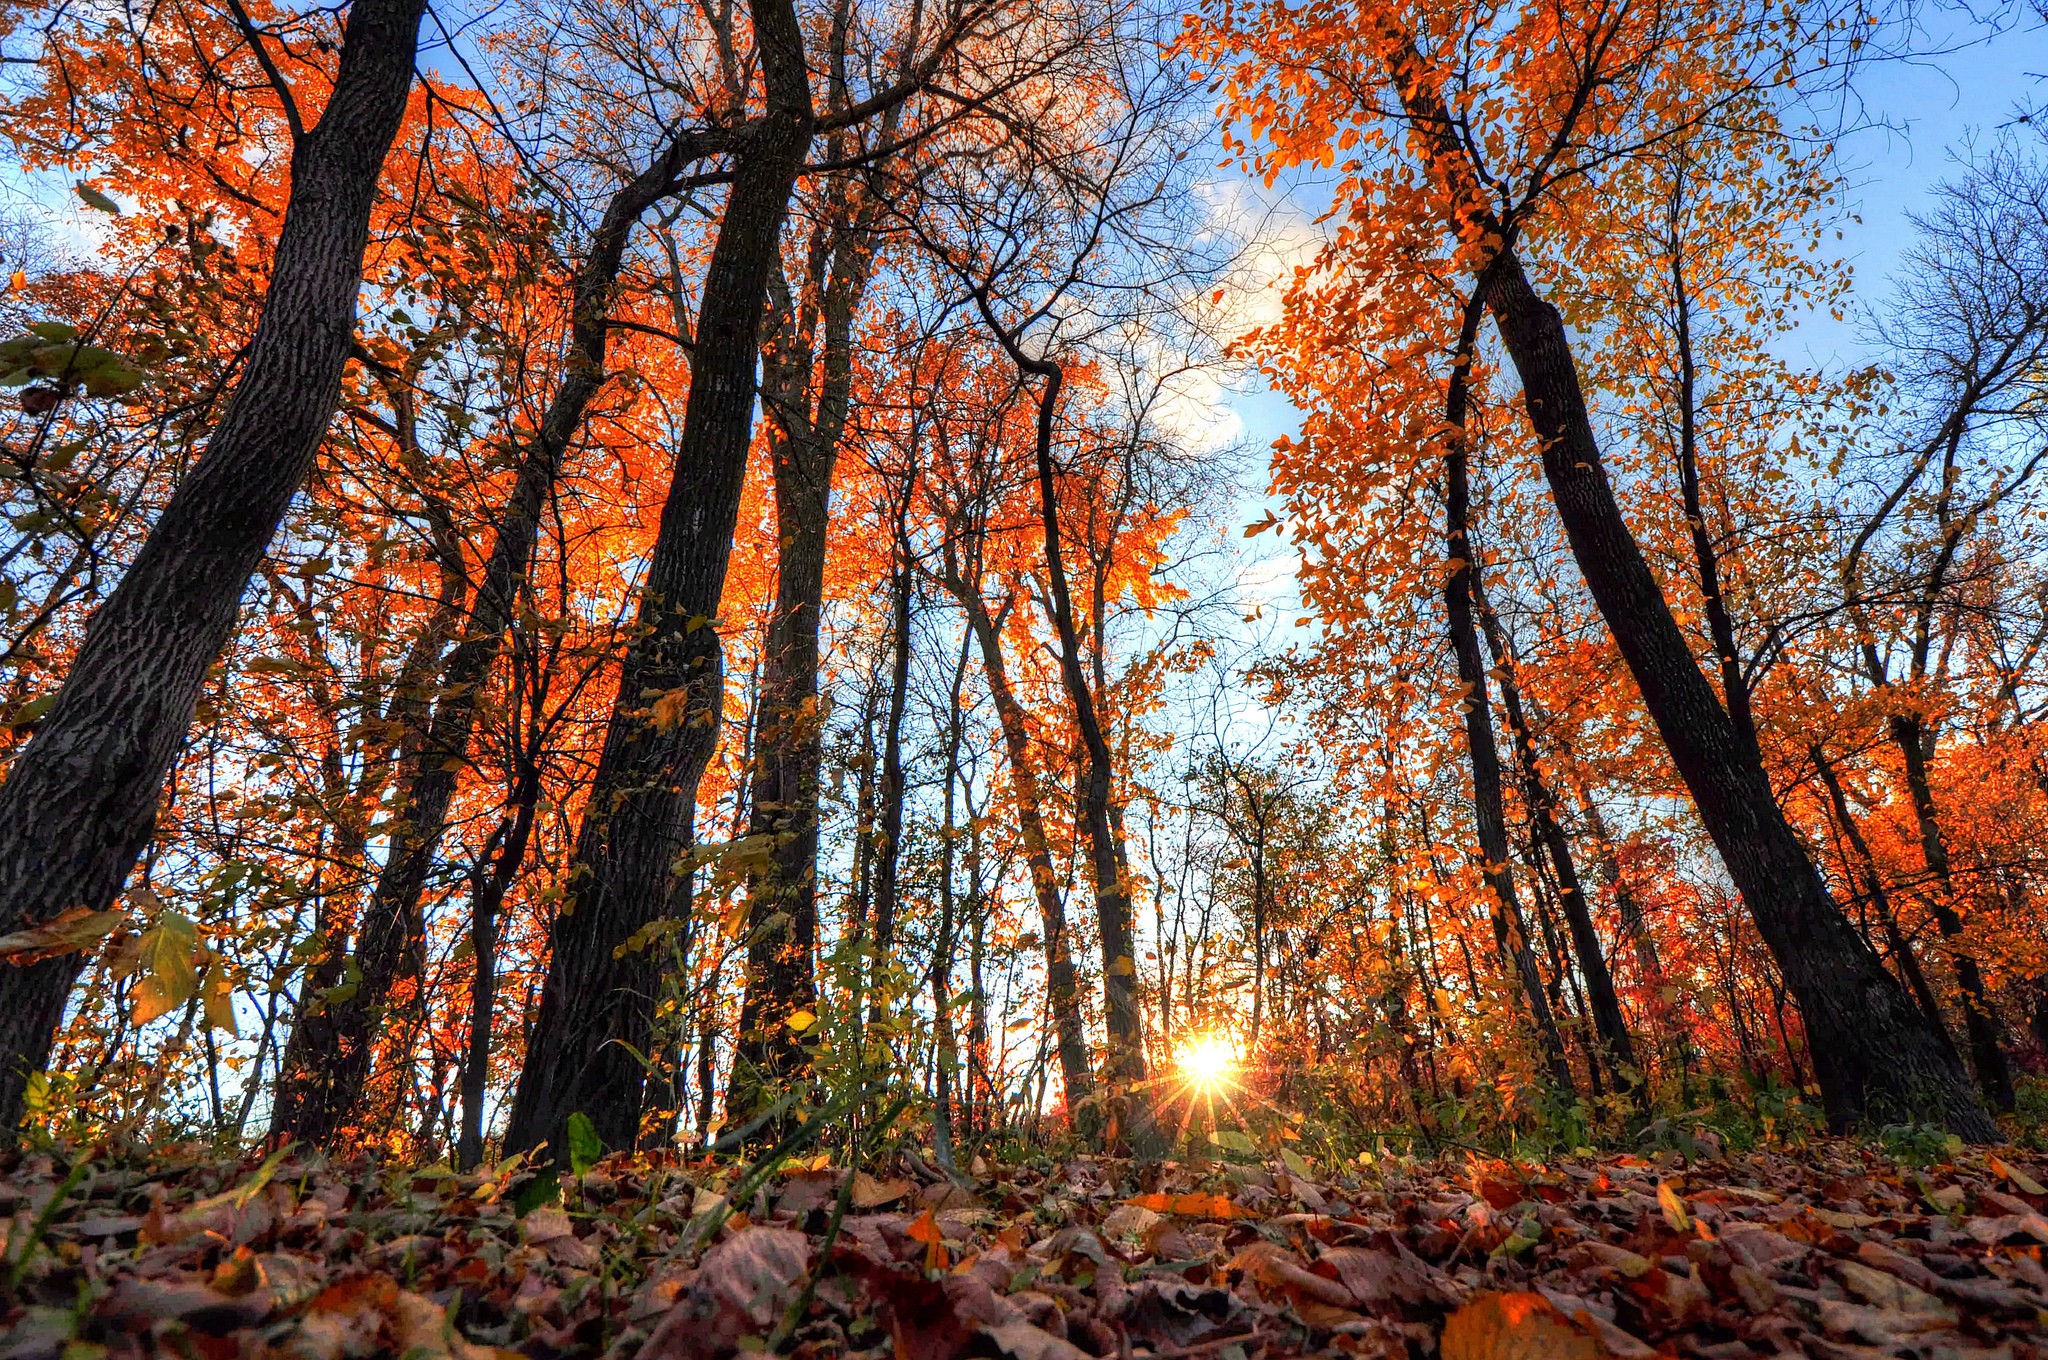 General 2048x1360 plants forest fall Sun worm's eye view low-angle trees sunlight fallen leaves leaves